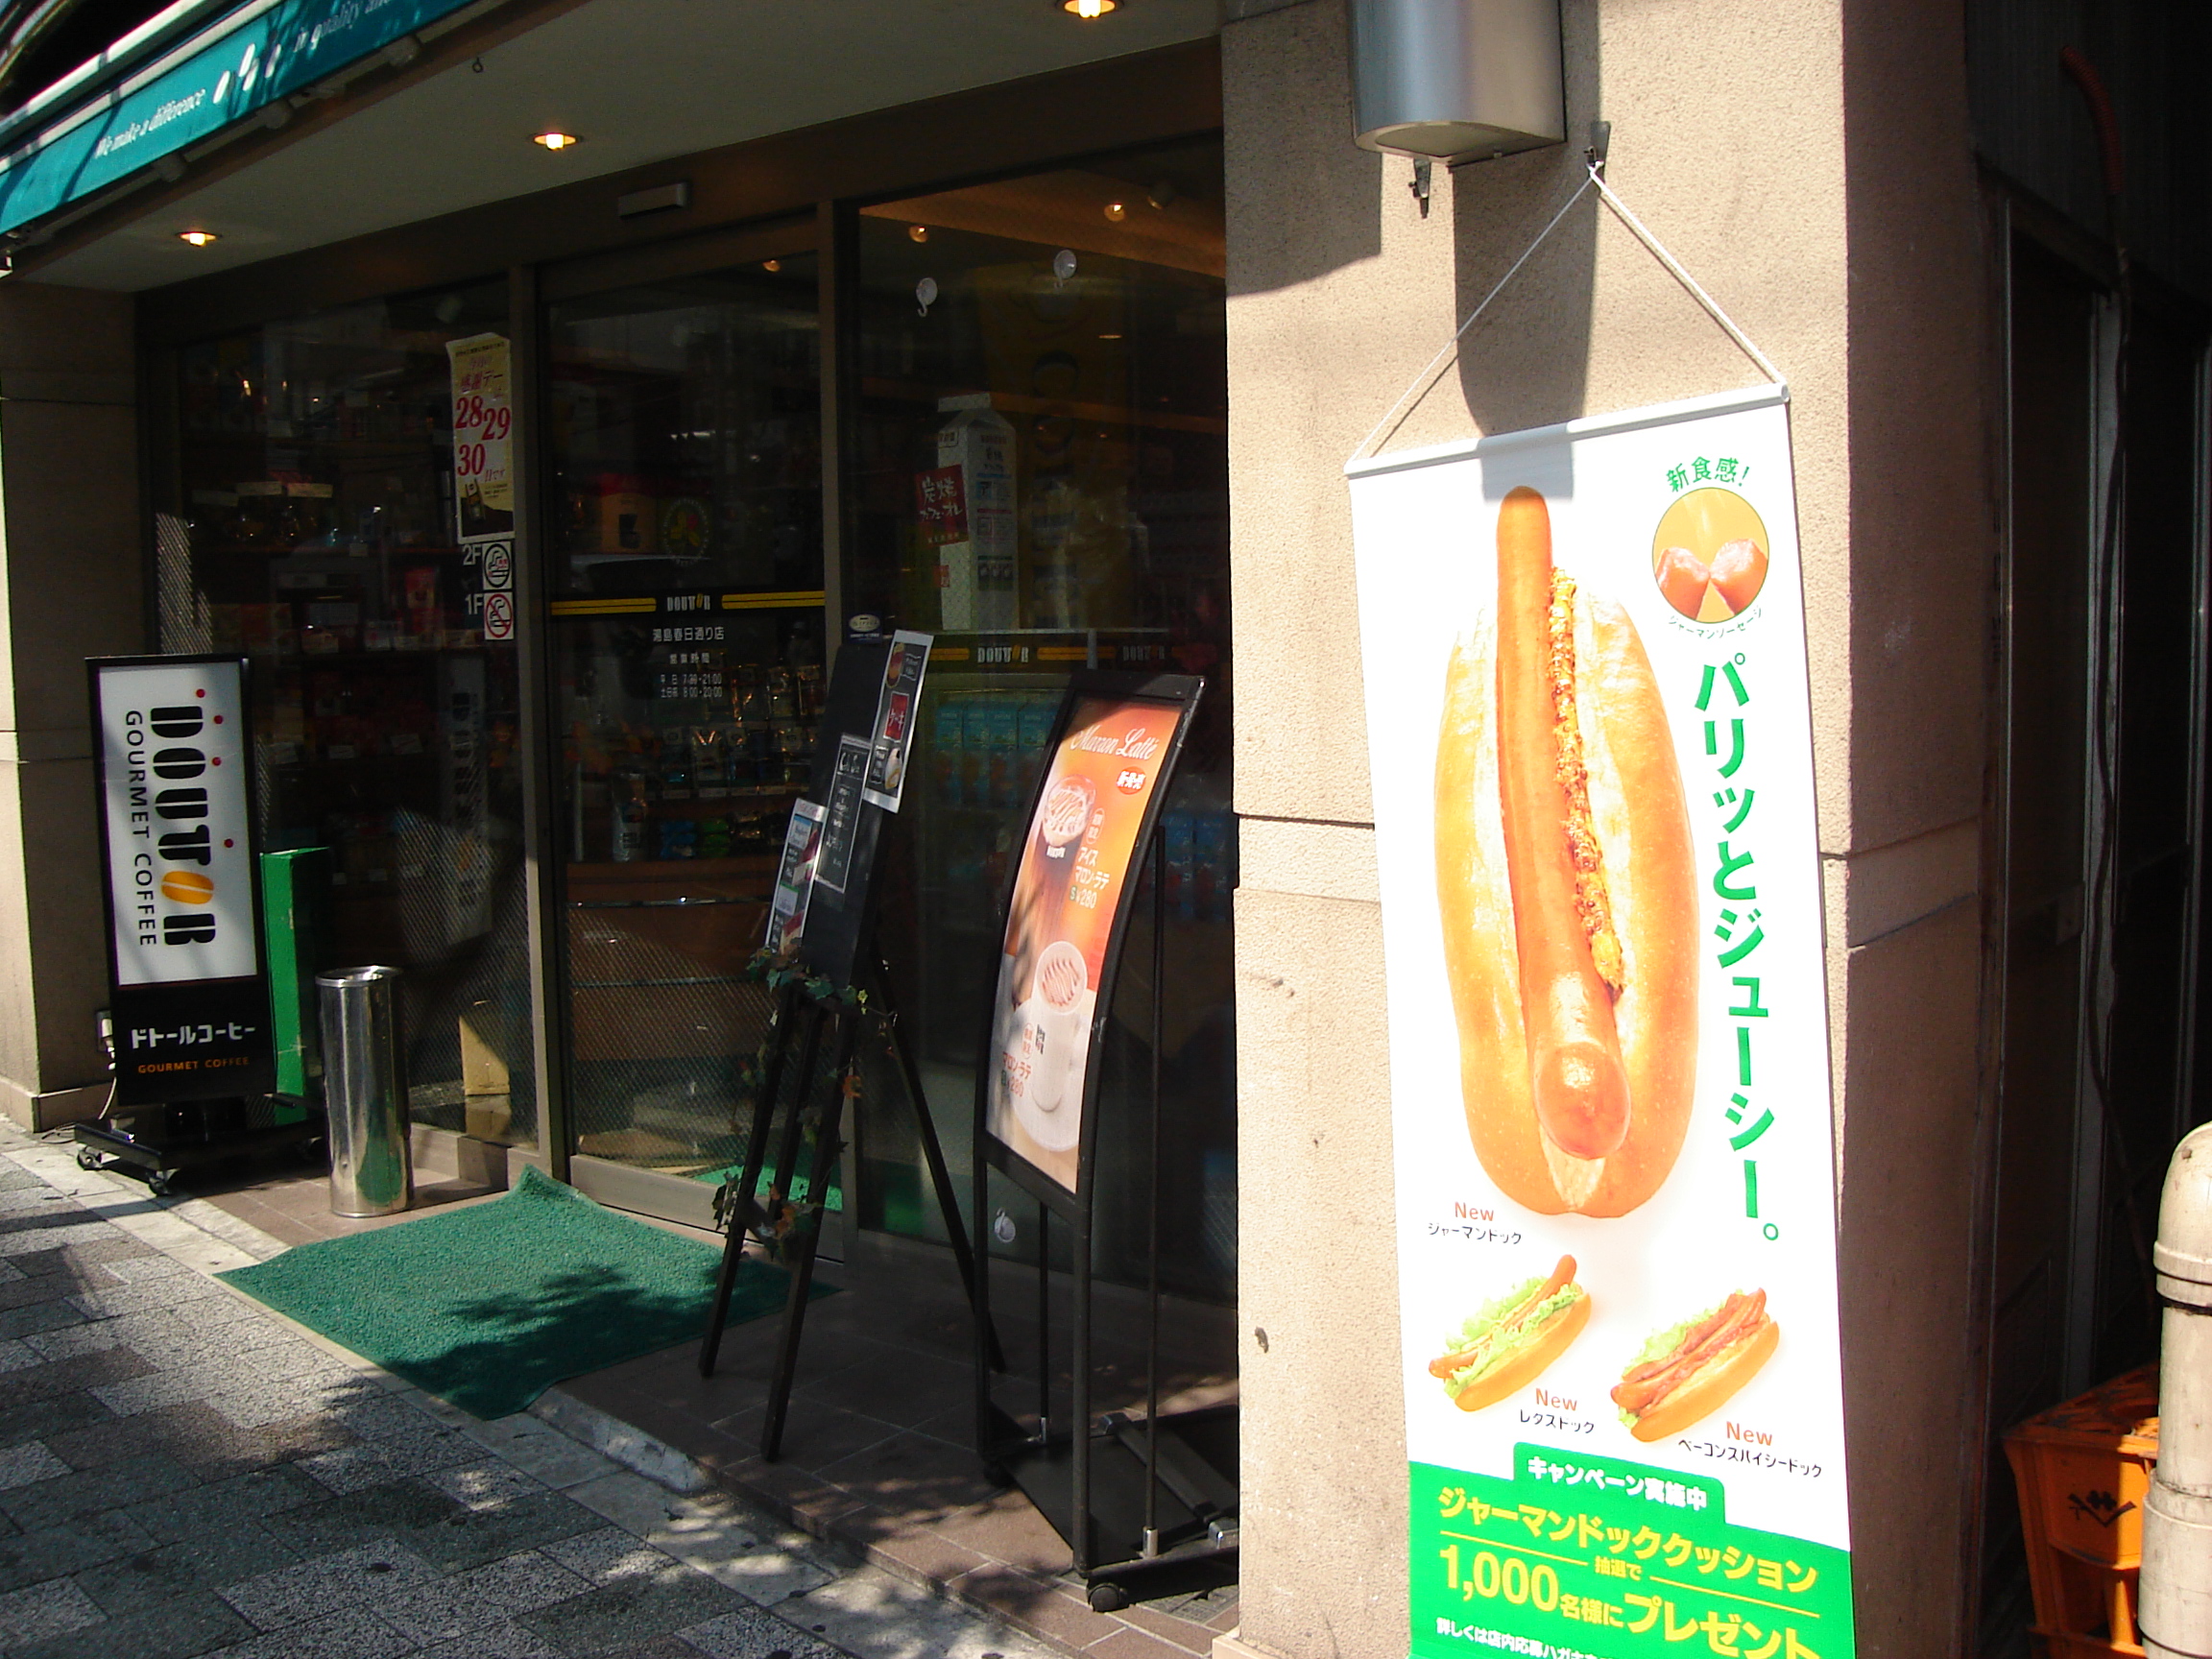 a sign outside a store shows hot dogs, one with lettuce added